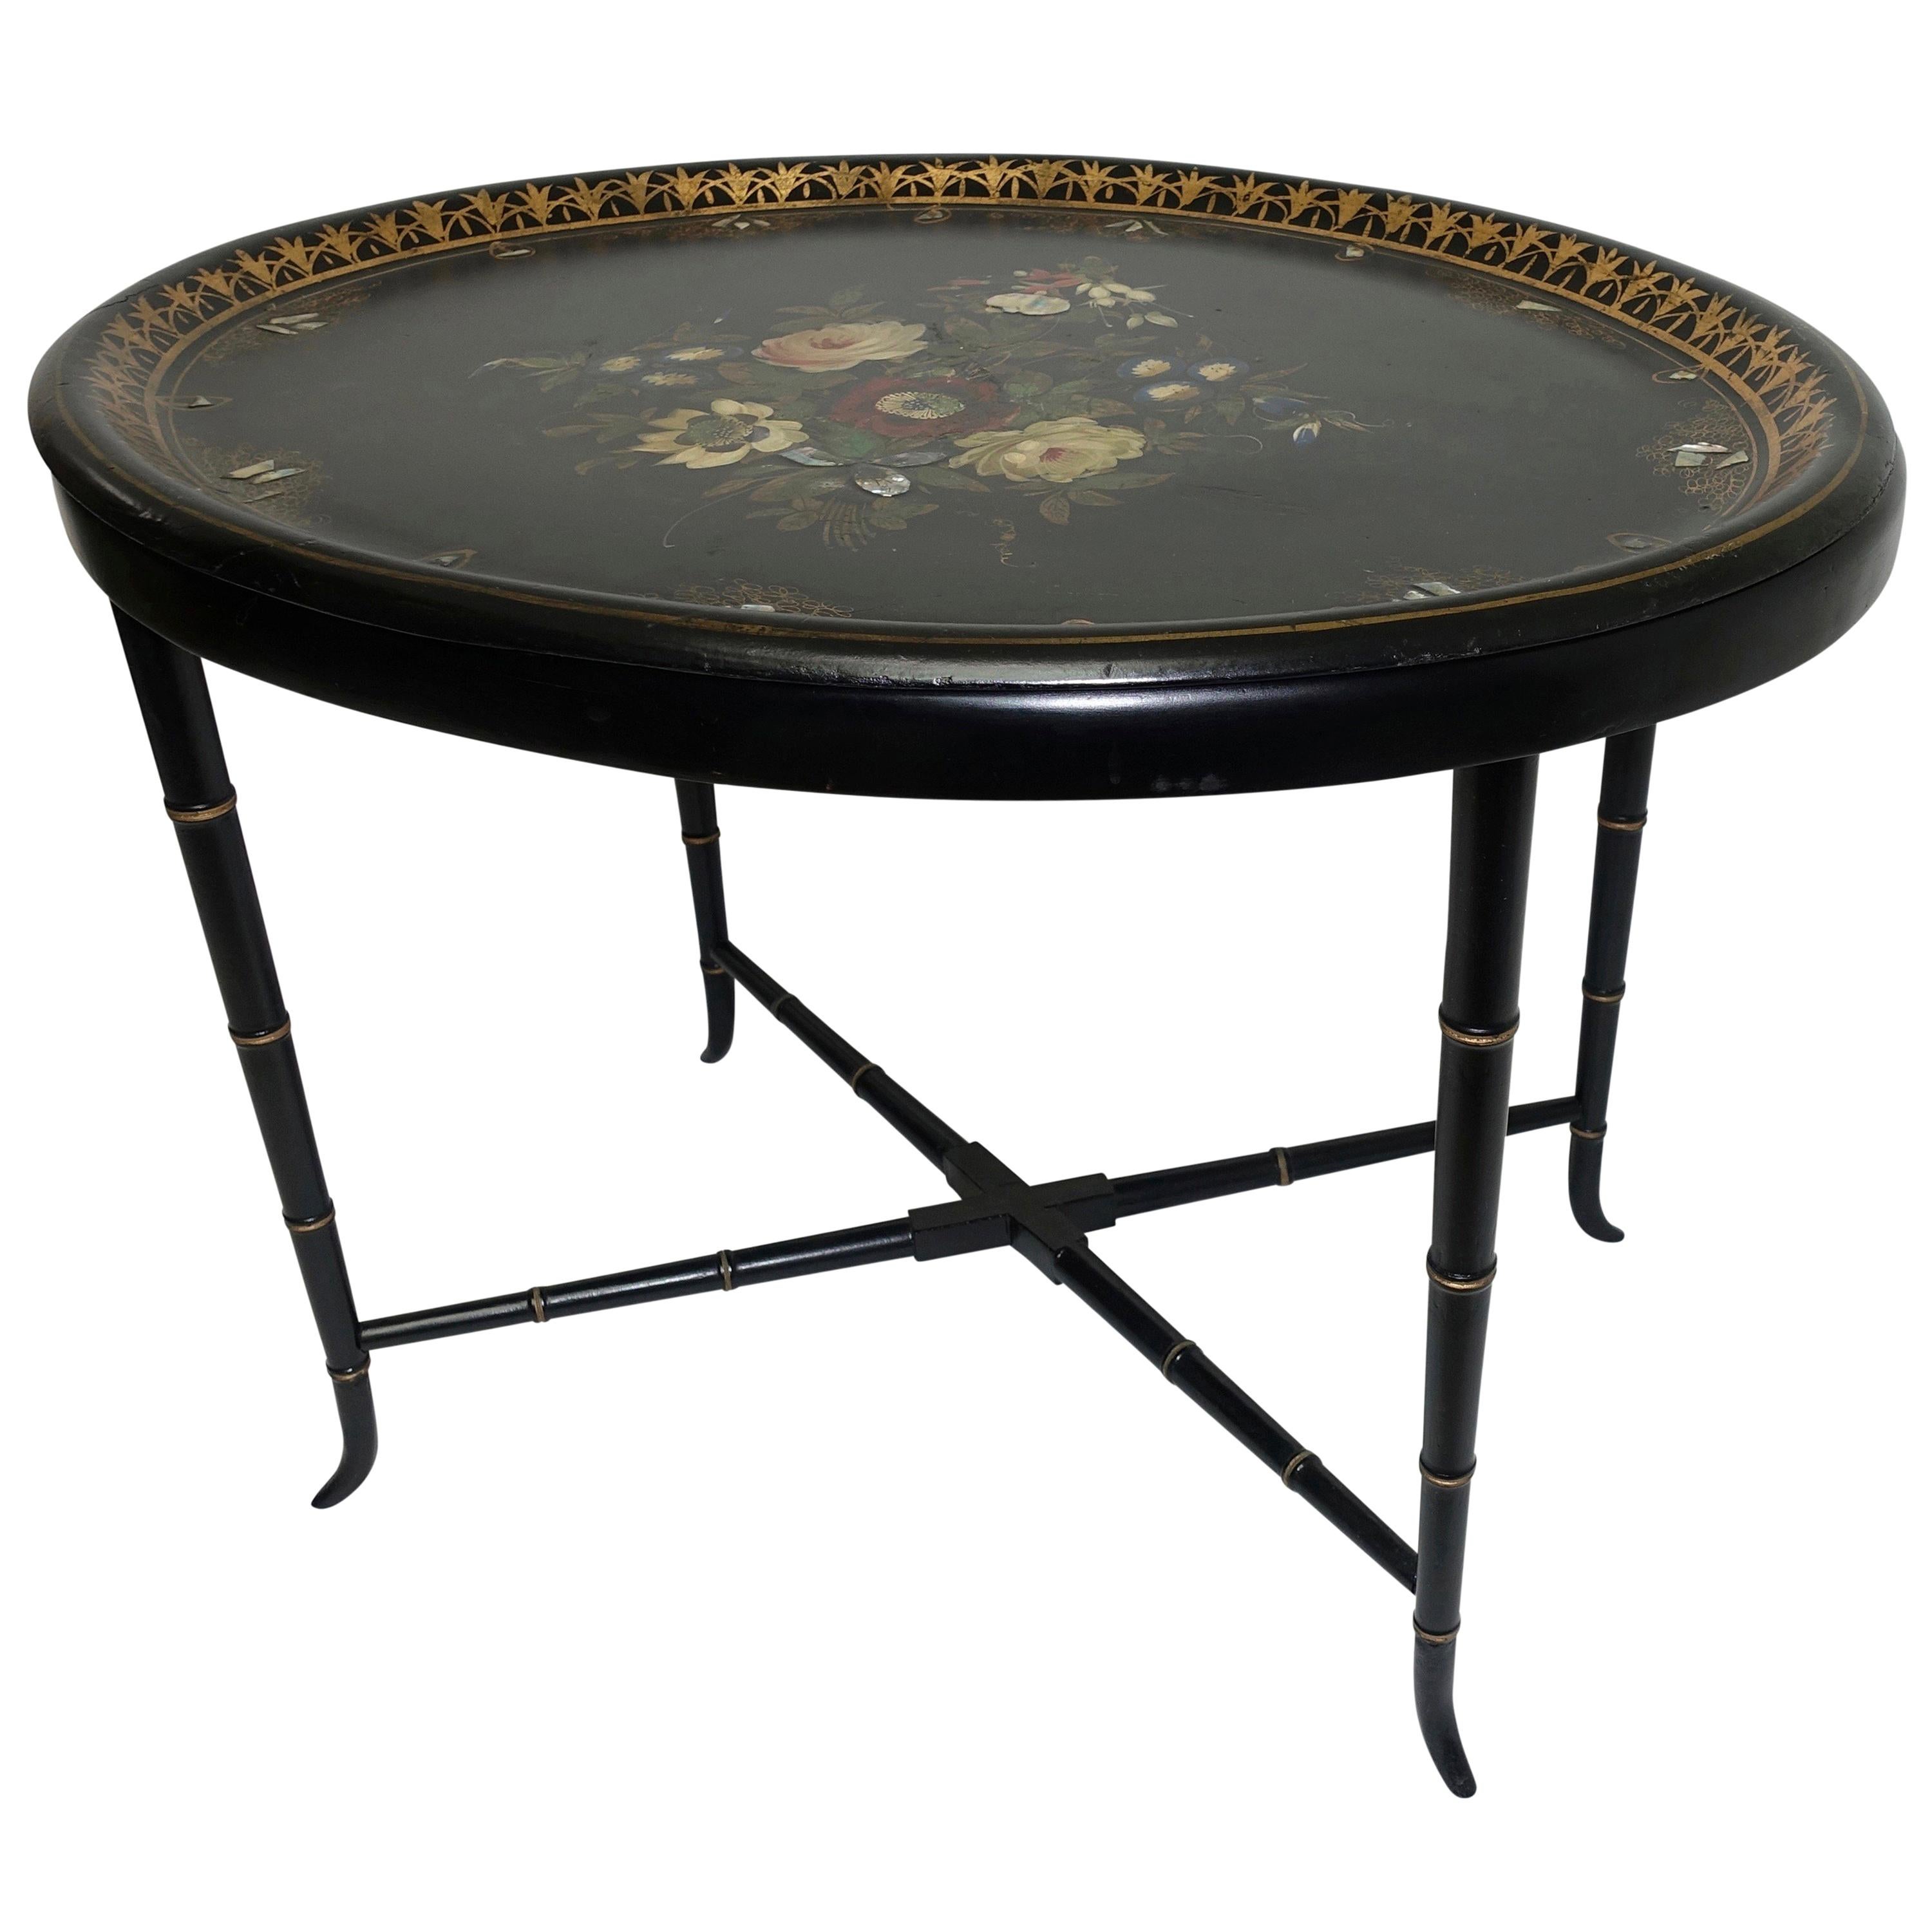 Papier Mâché Hand Painted Tray Table with Mother of Pearl Inlay, 19th Century